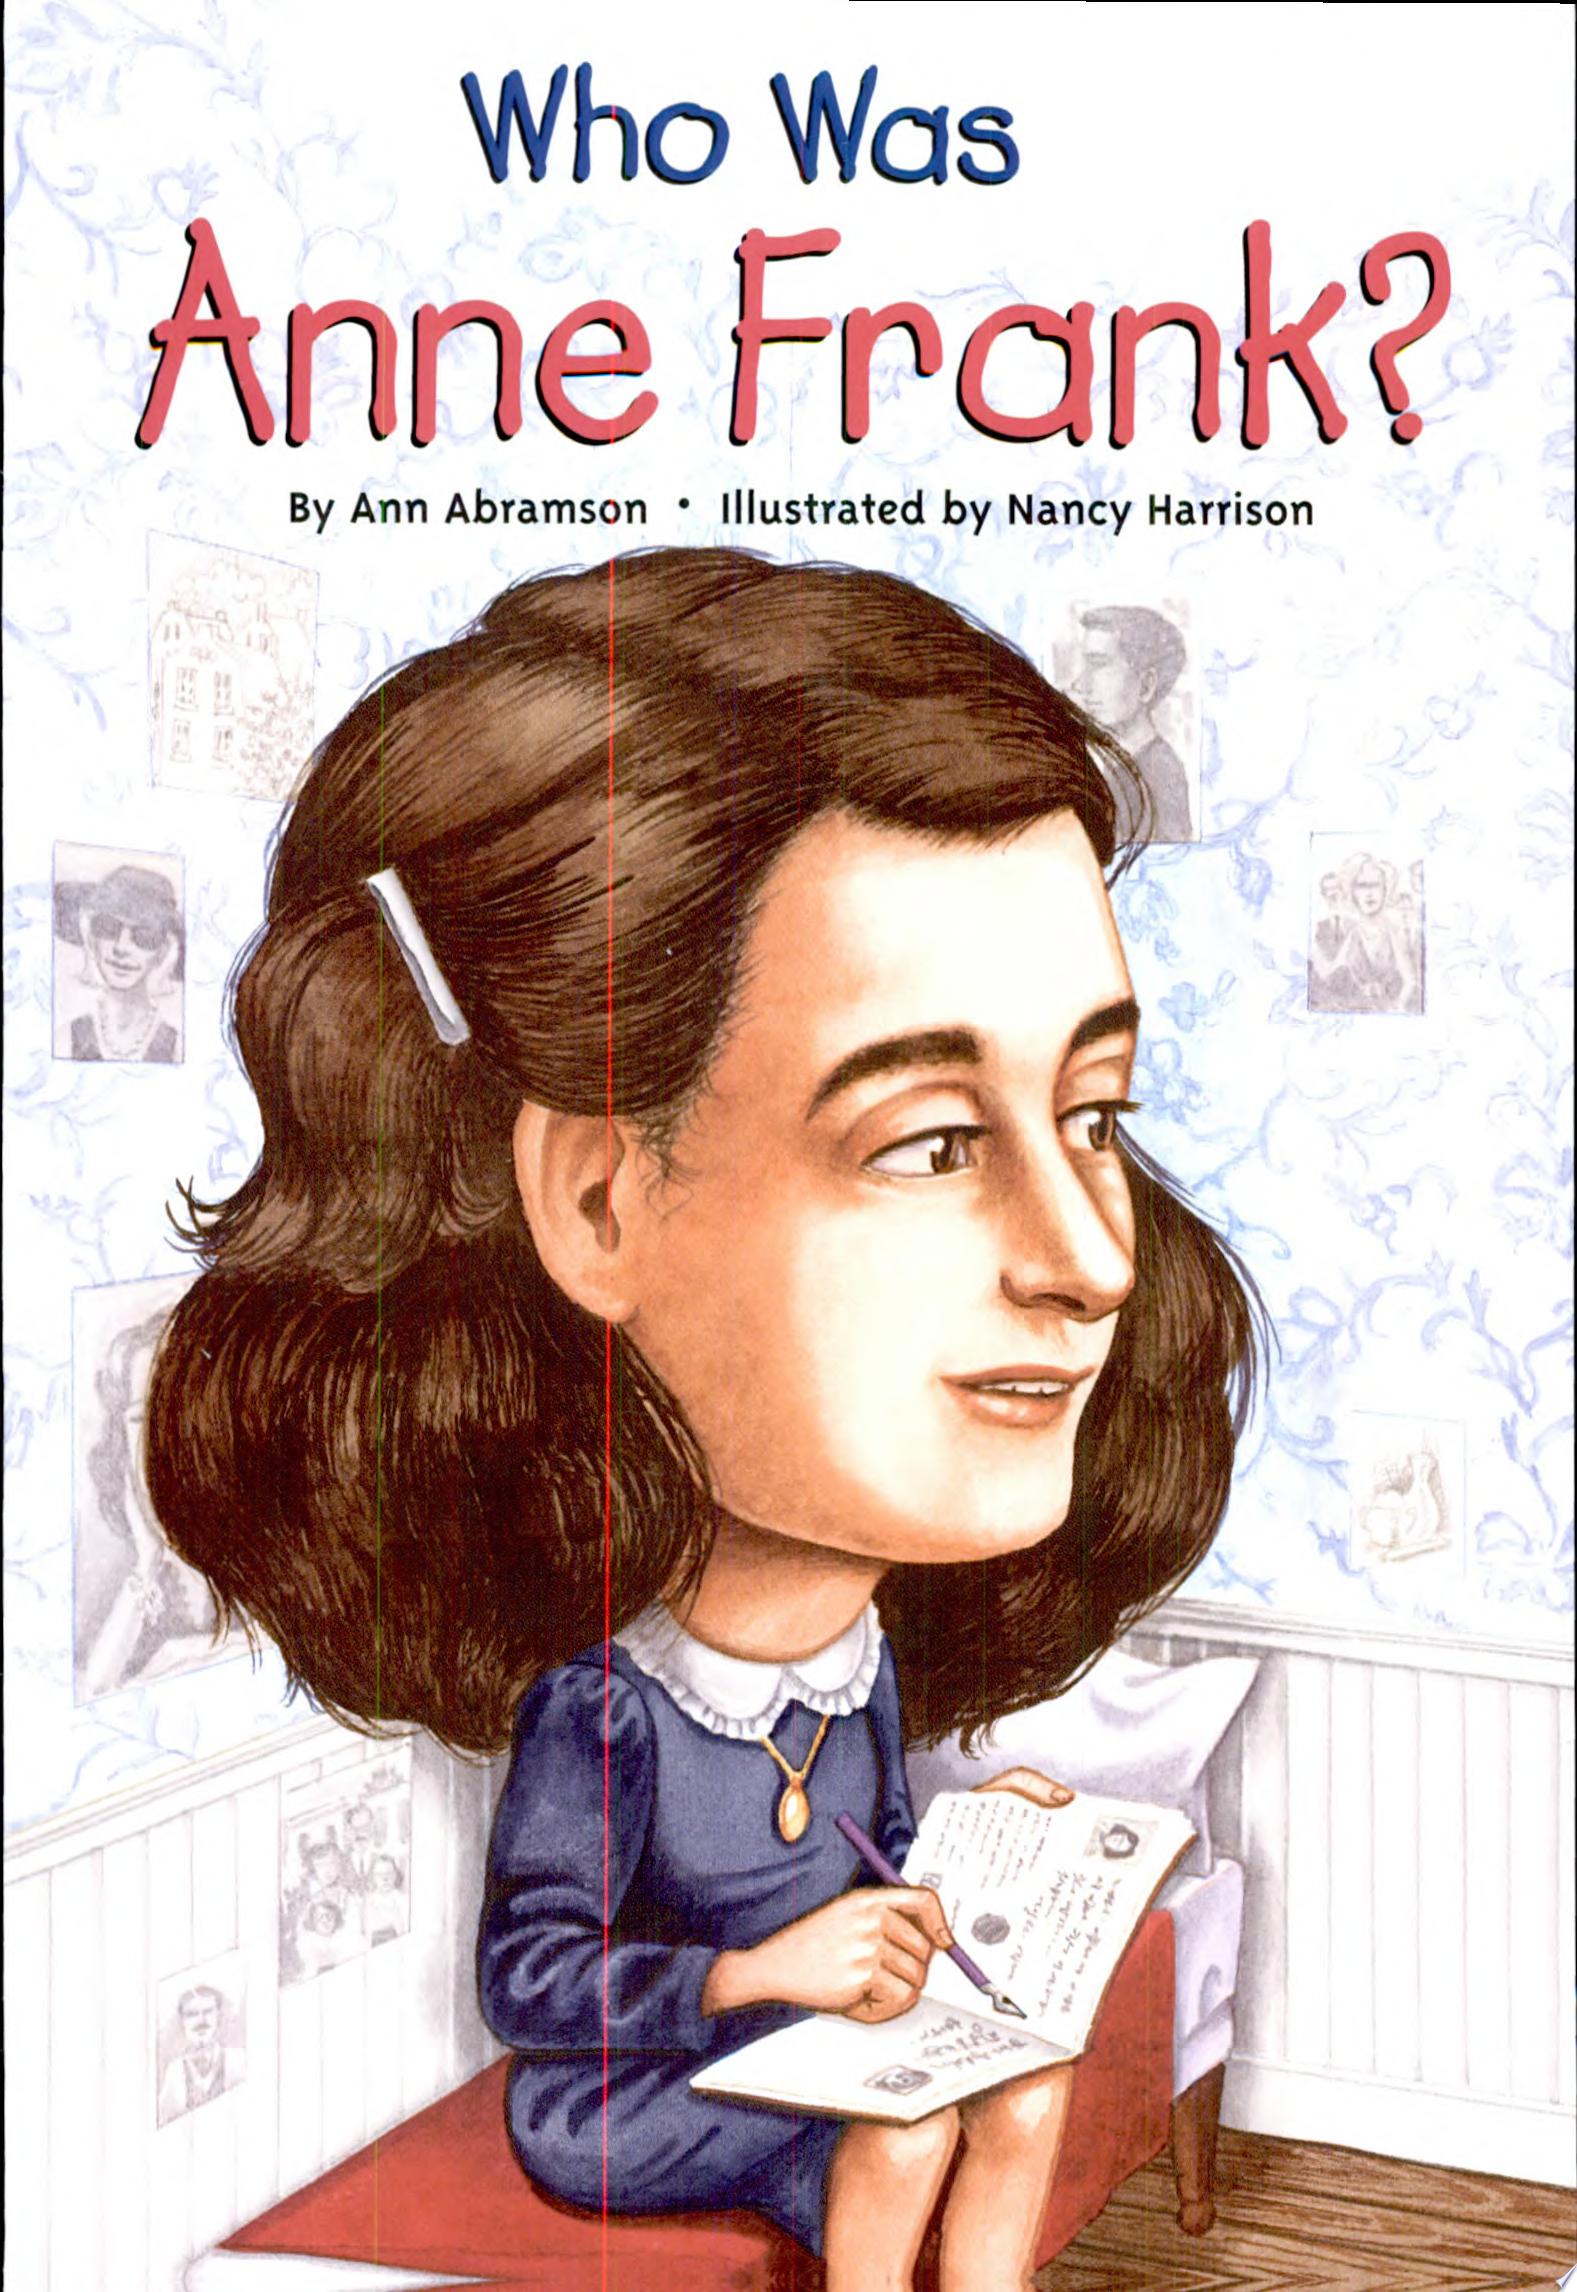 Image for "Who Was Anne Frank?"